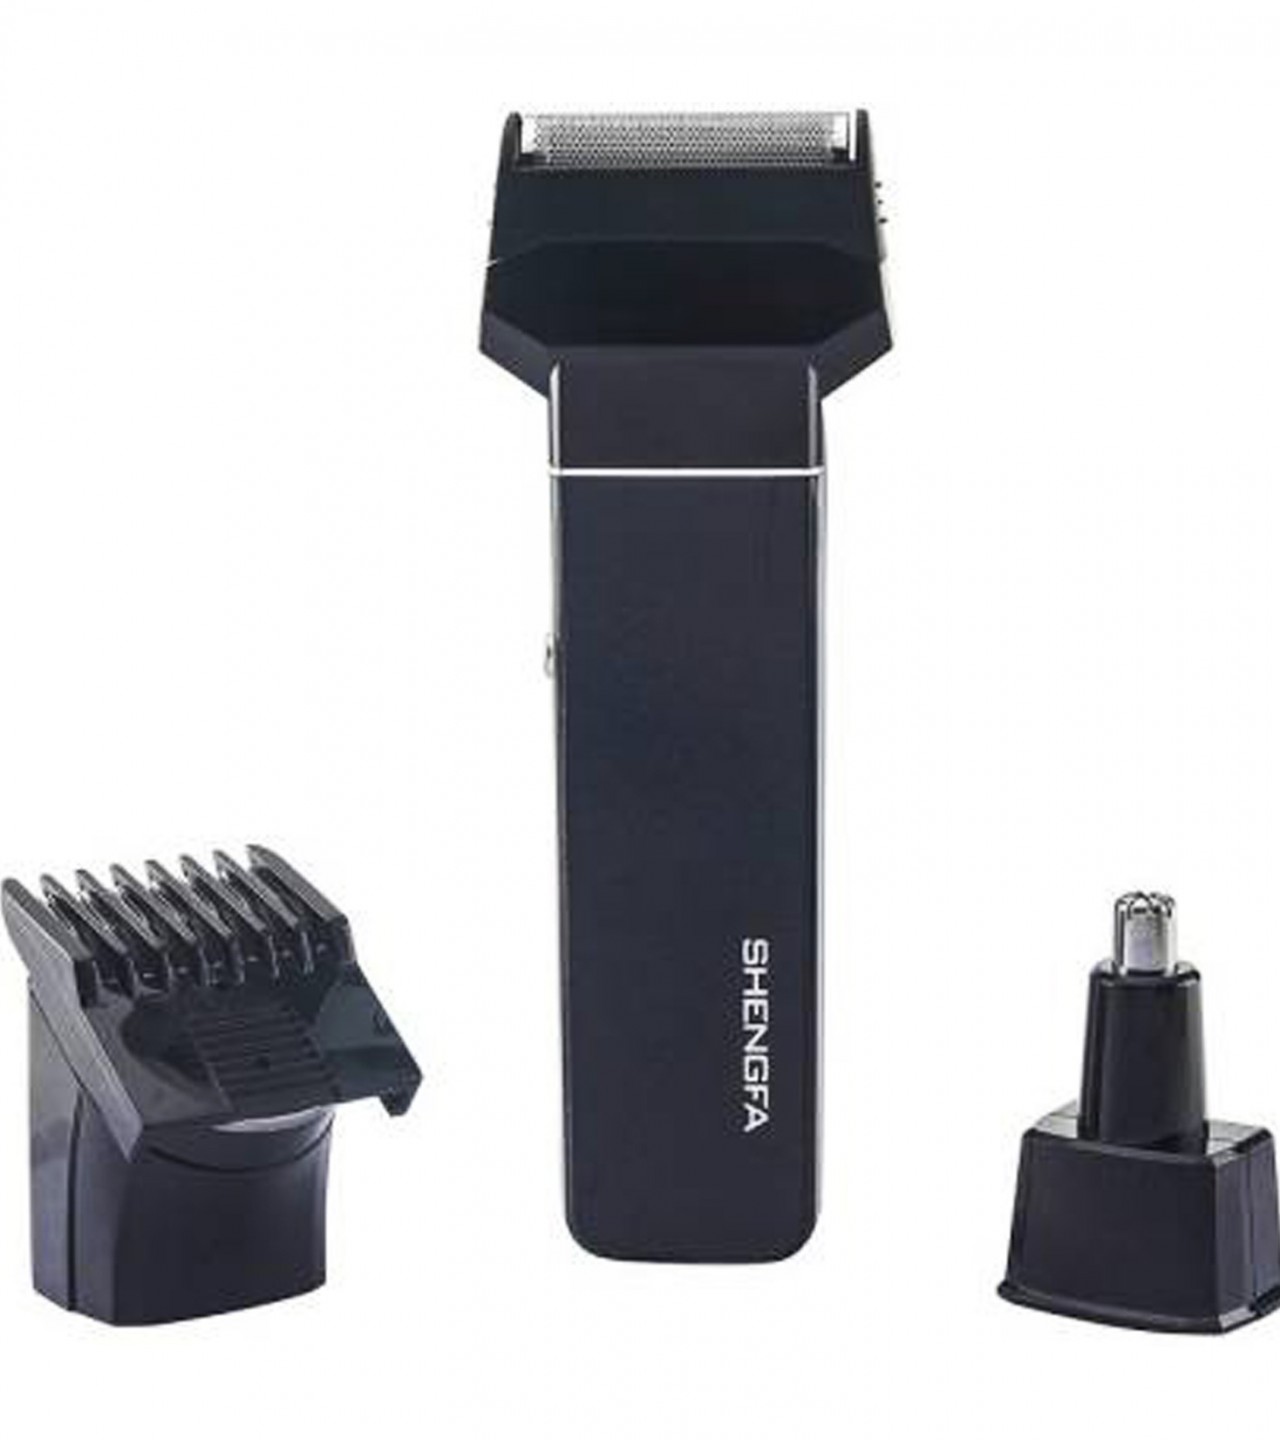 SHENGFA Multi-Functional Nose Trimmer + Shaver + Hair Clipper Family Suits - SF-F1